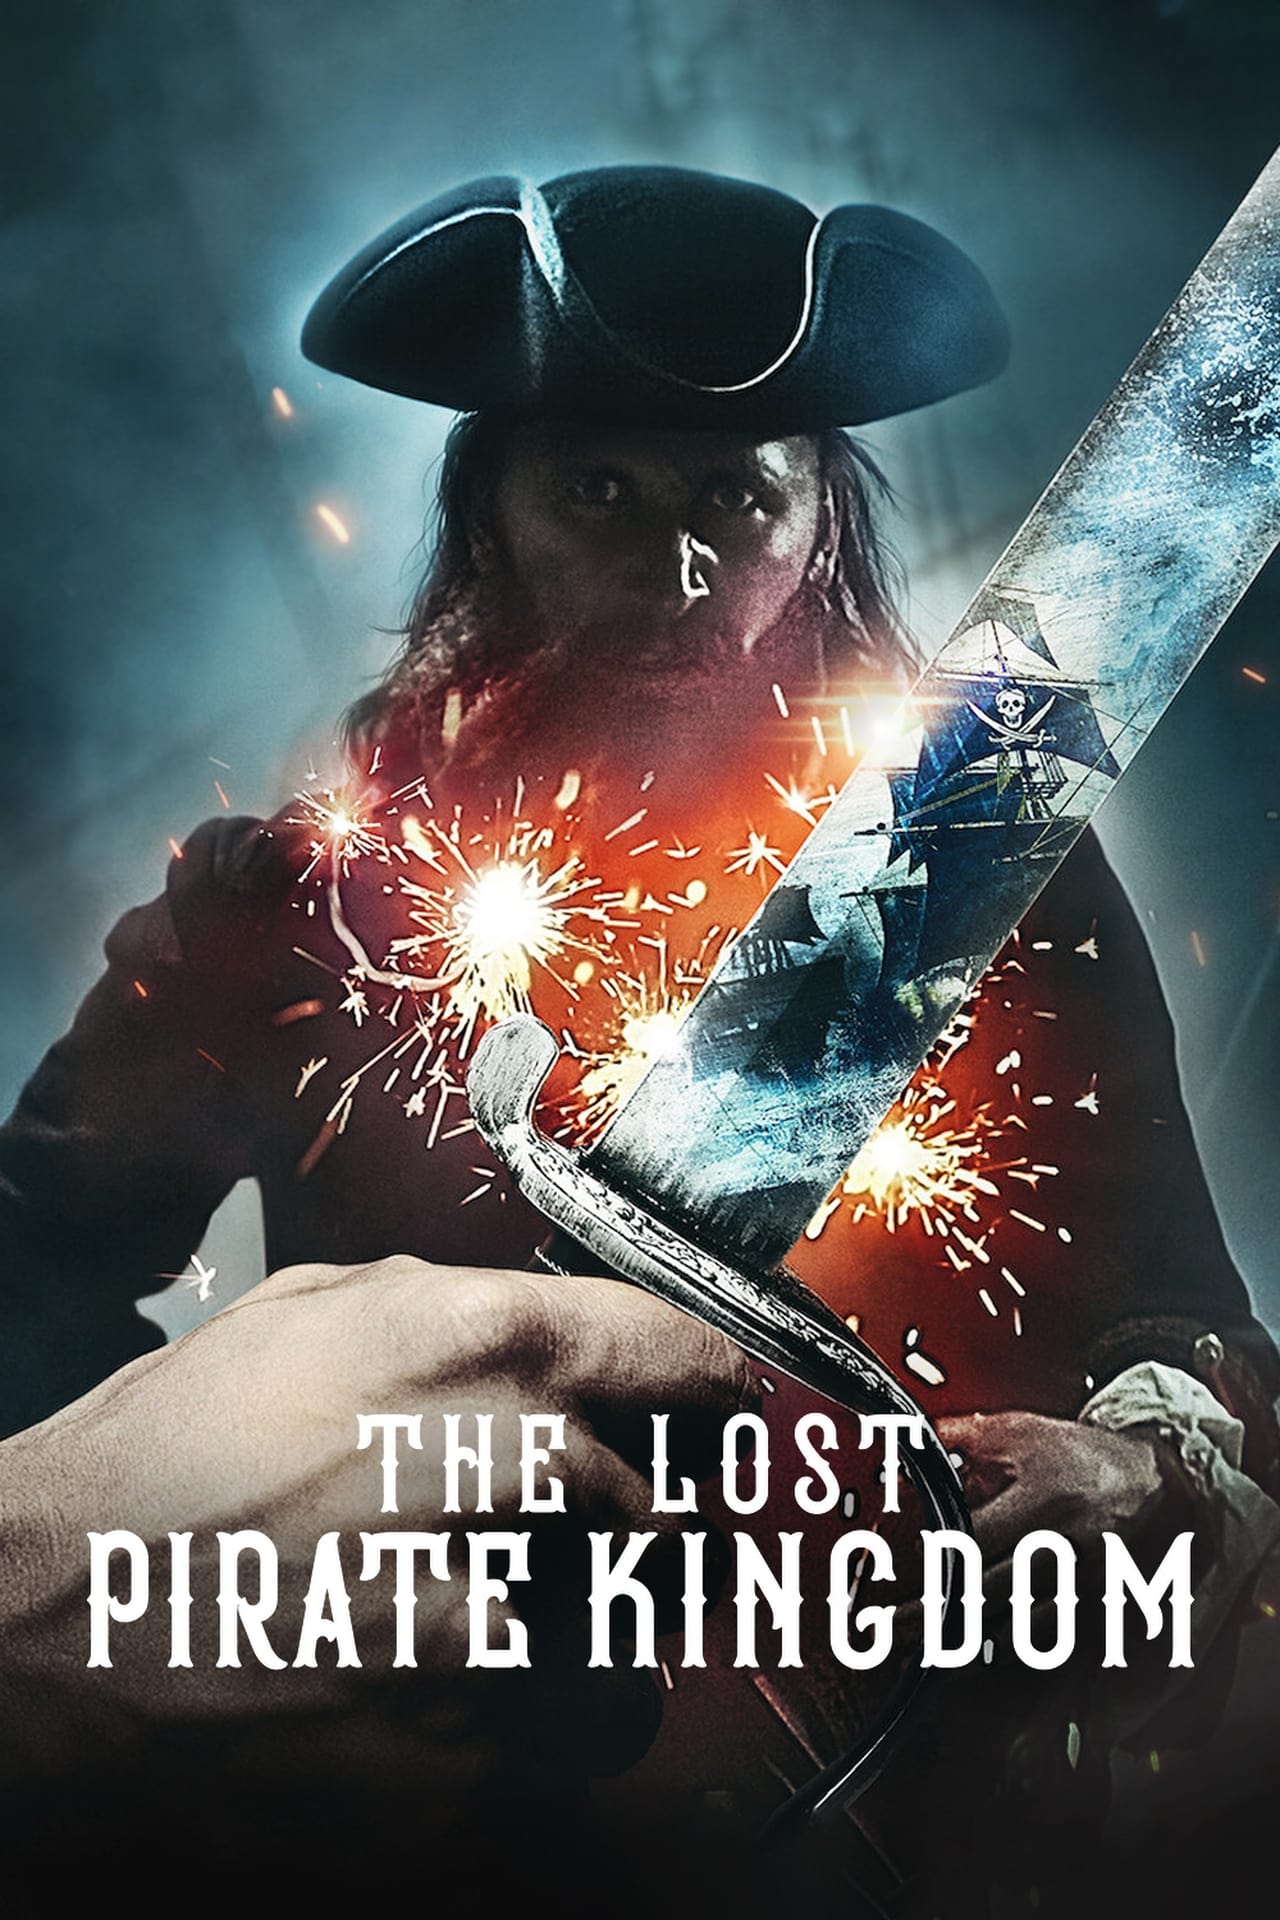 The Lost Pirate Kingdom (2021) S1 EP5 Deal or No Deal 640Kbps 25Fps 48Khz 5.1Ch DD+ NF E-AC3 Turkish Audio TAC